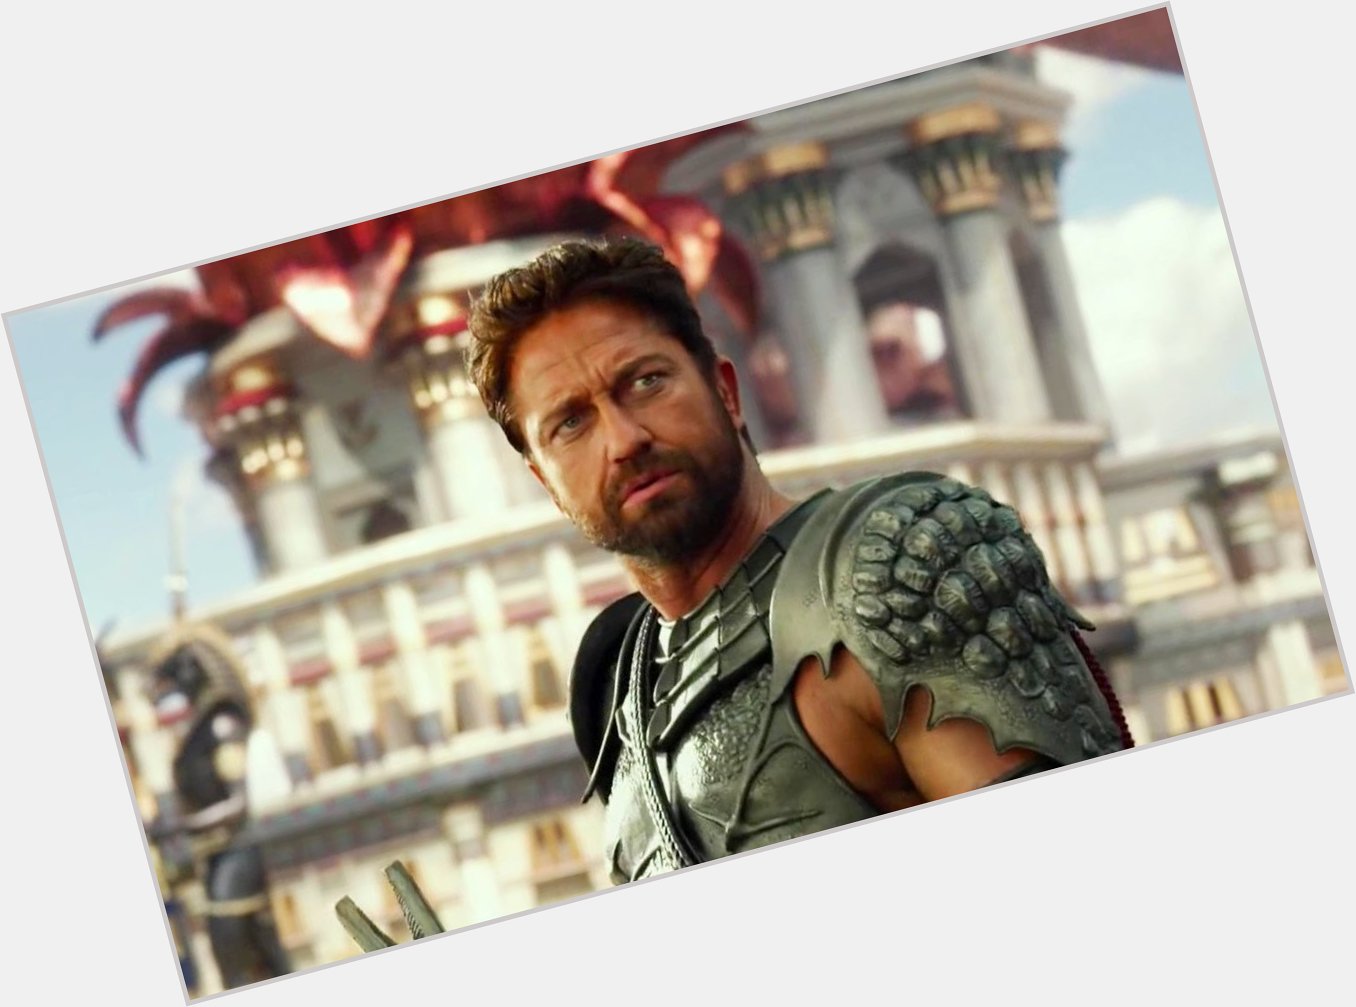 Happy Birthday to Gerard Butler who turns 48 today! 